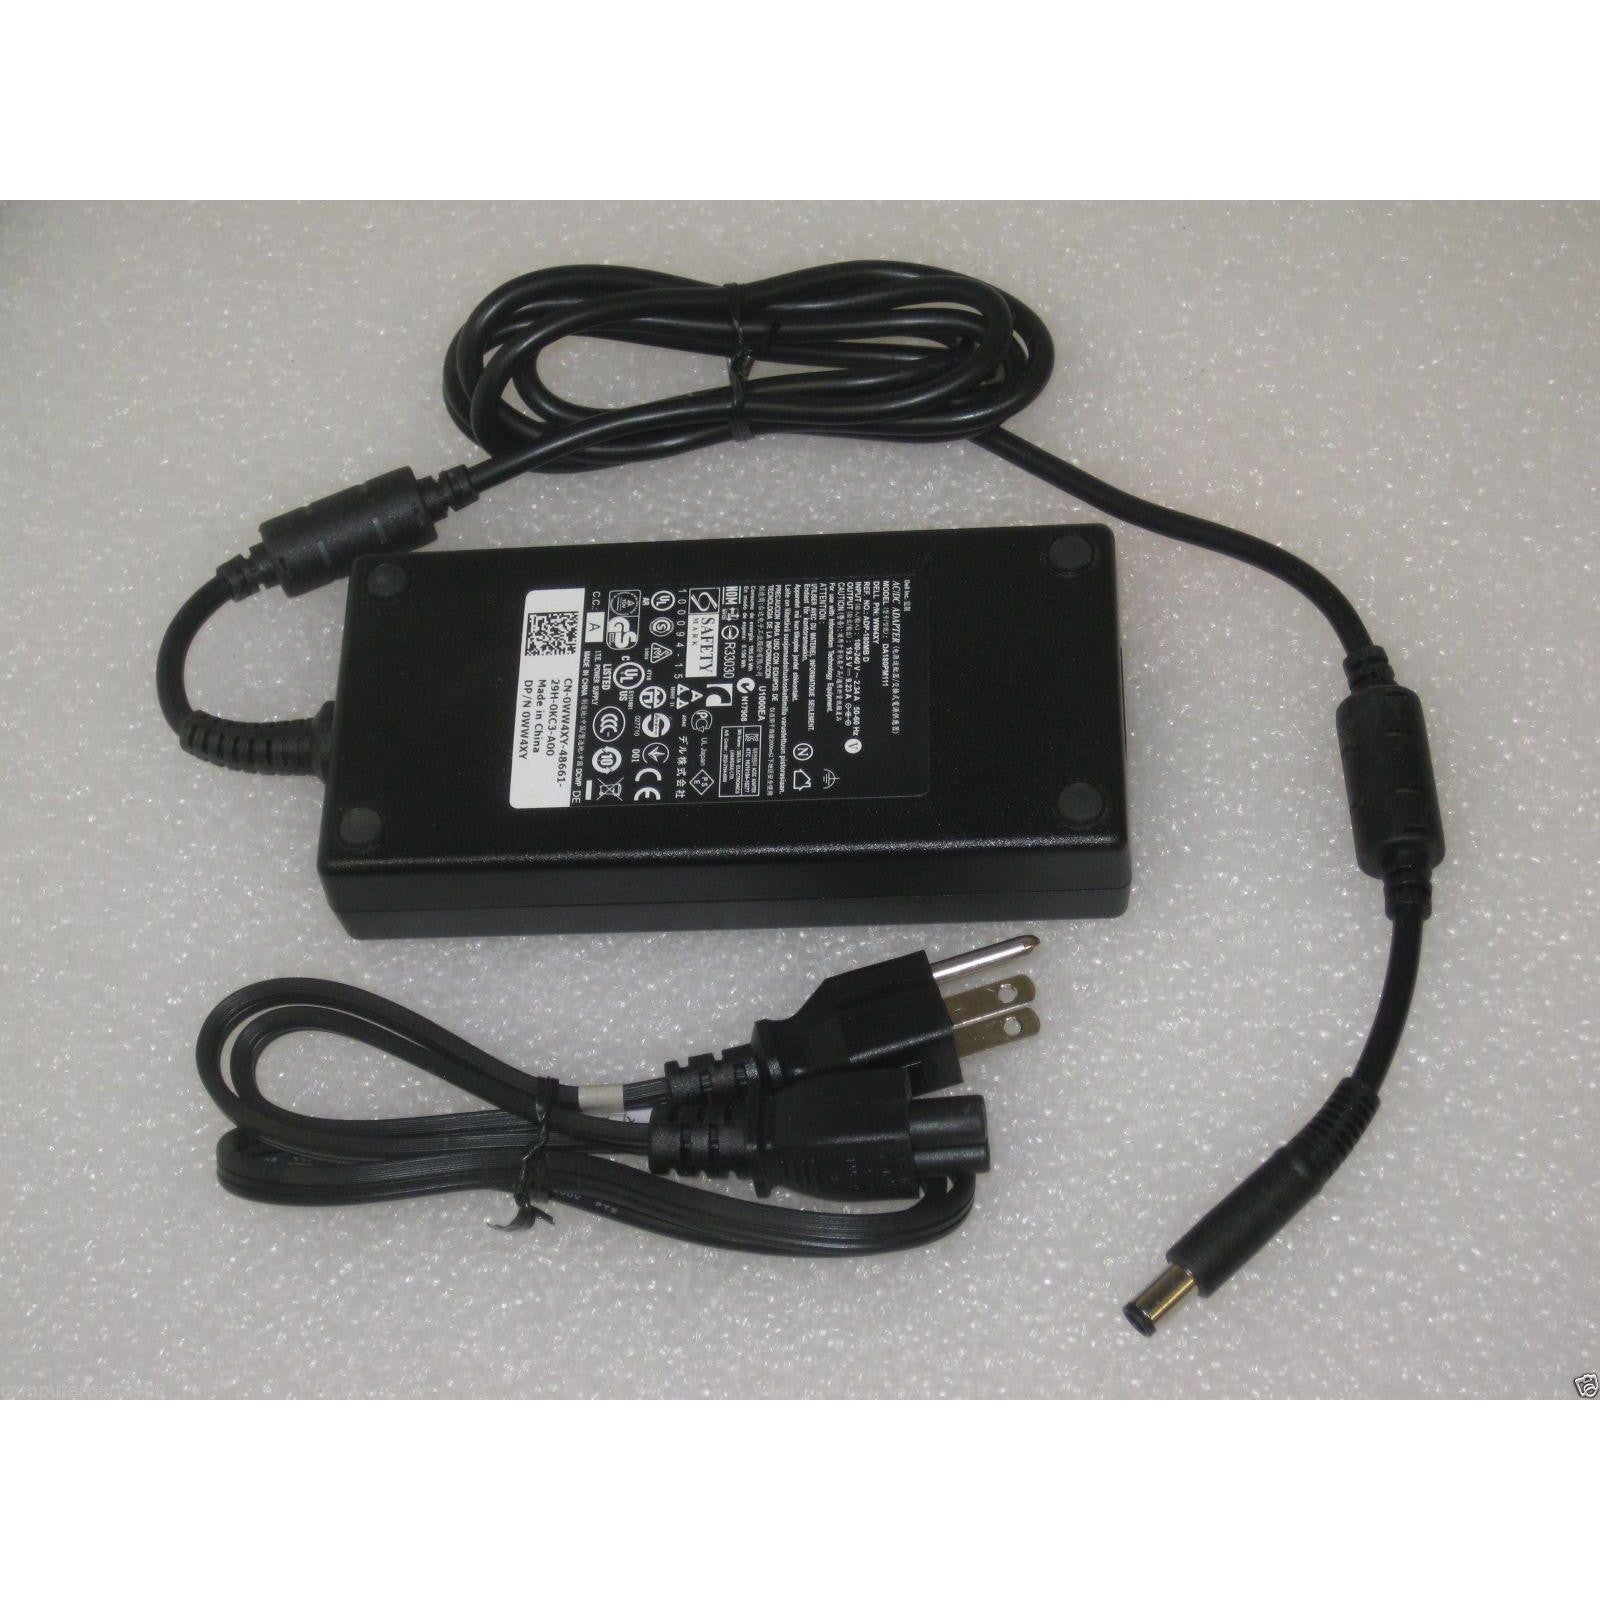 New Genuine Dell ADP-180MB B DW5G3 0DW5G3 3XYY8 03XYY8 05N11K 5N11K 450-16902 450-16903 450-18647 AC Adapter Charger 180W